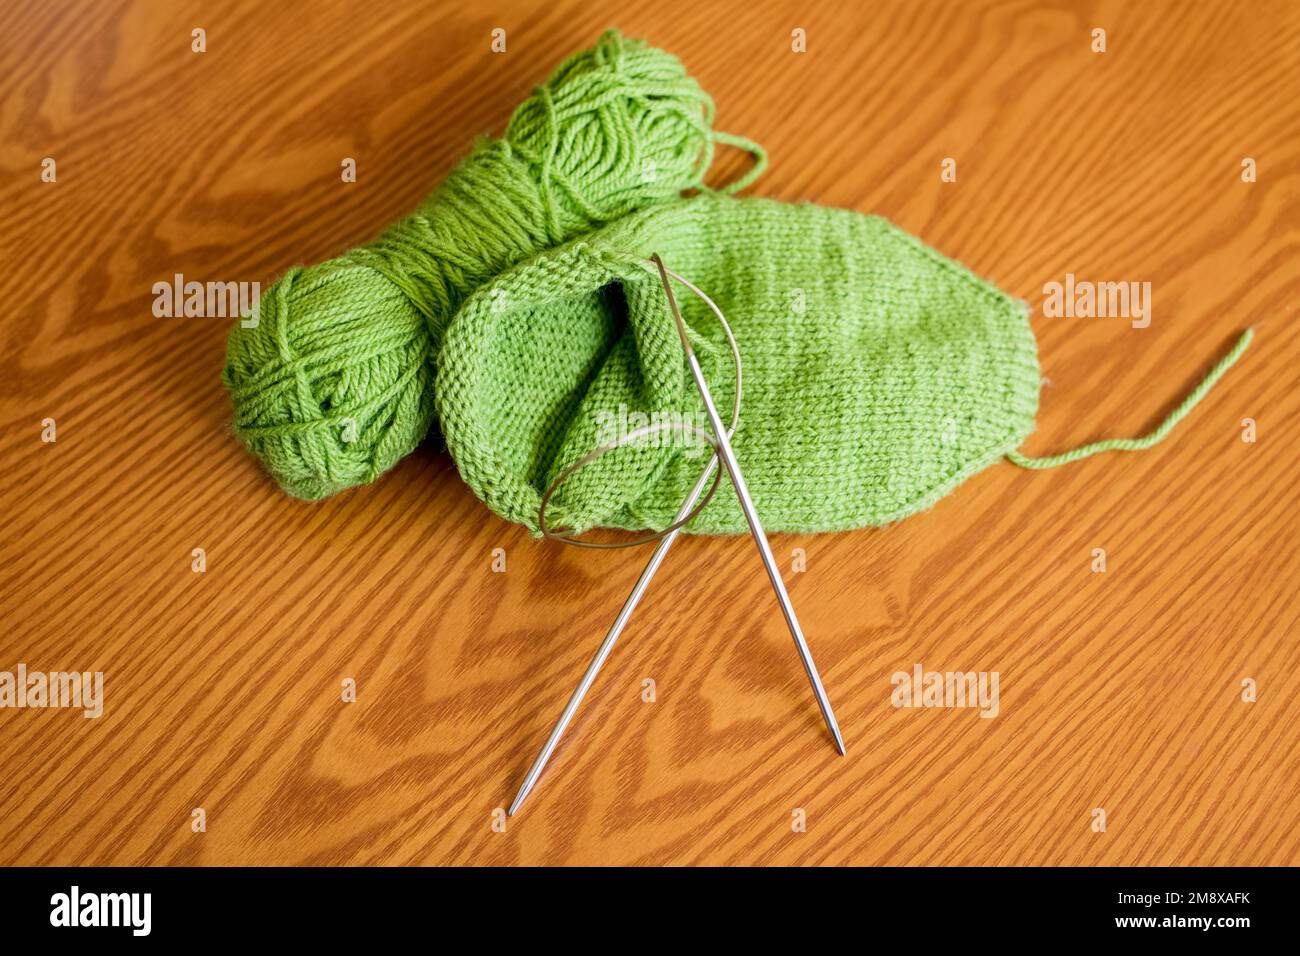 Knitted sock, ball of yarn and circular knitting needles on a wooden table surface. Top view. Stock Photo